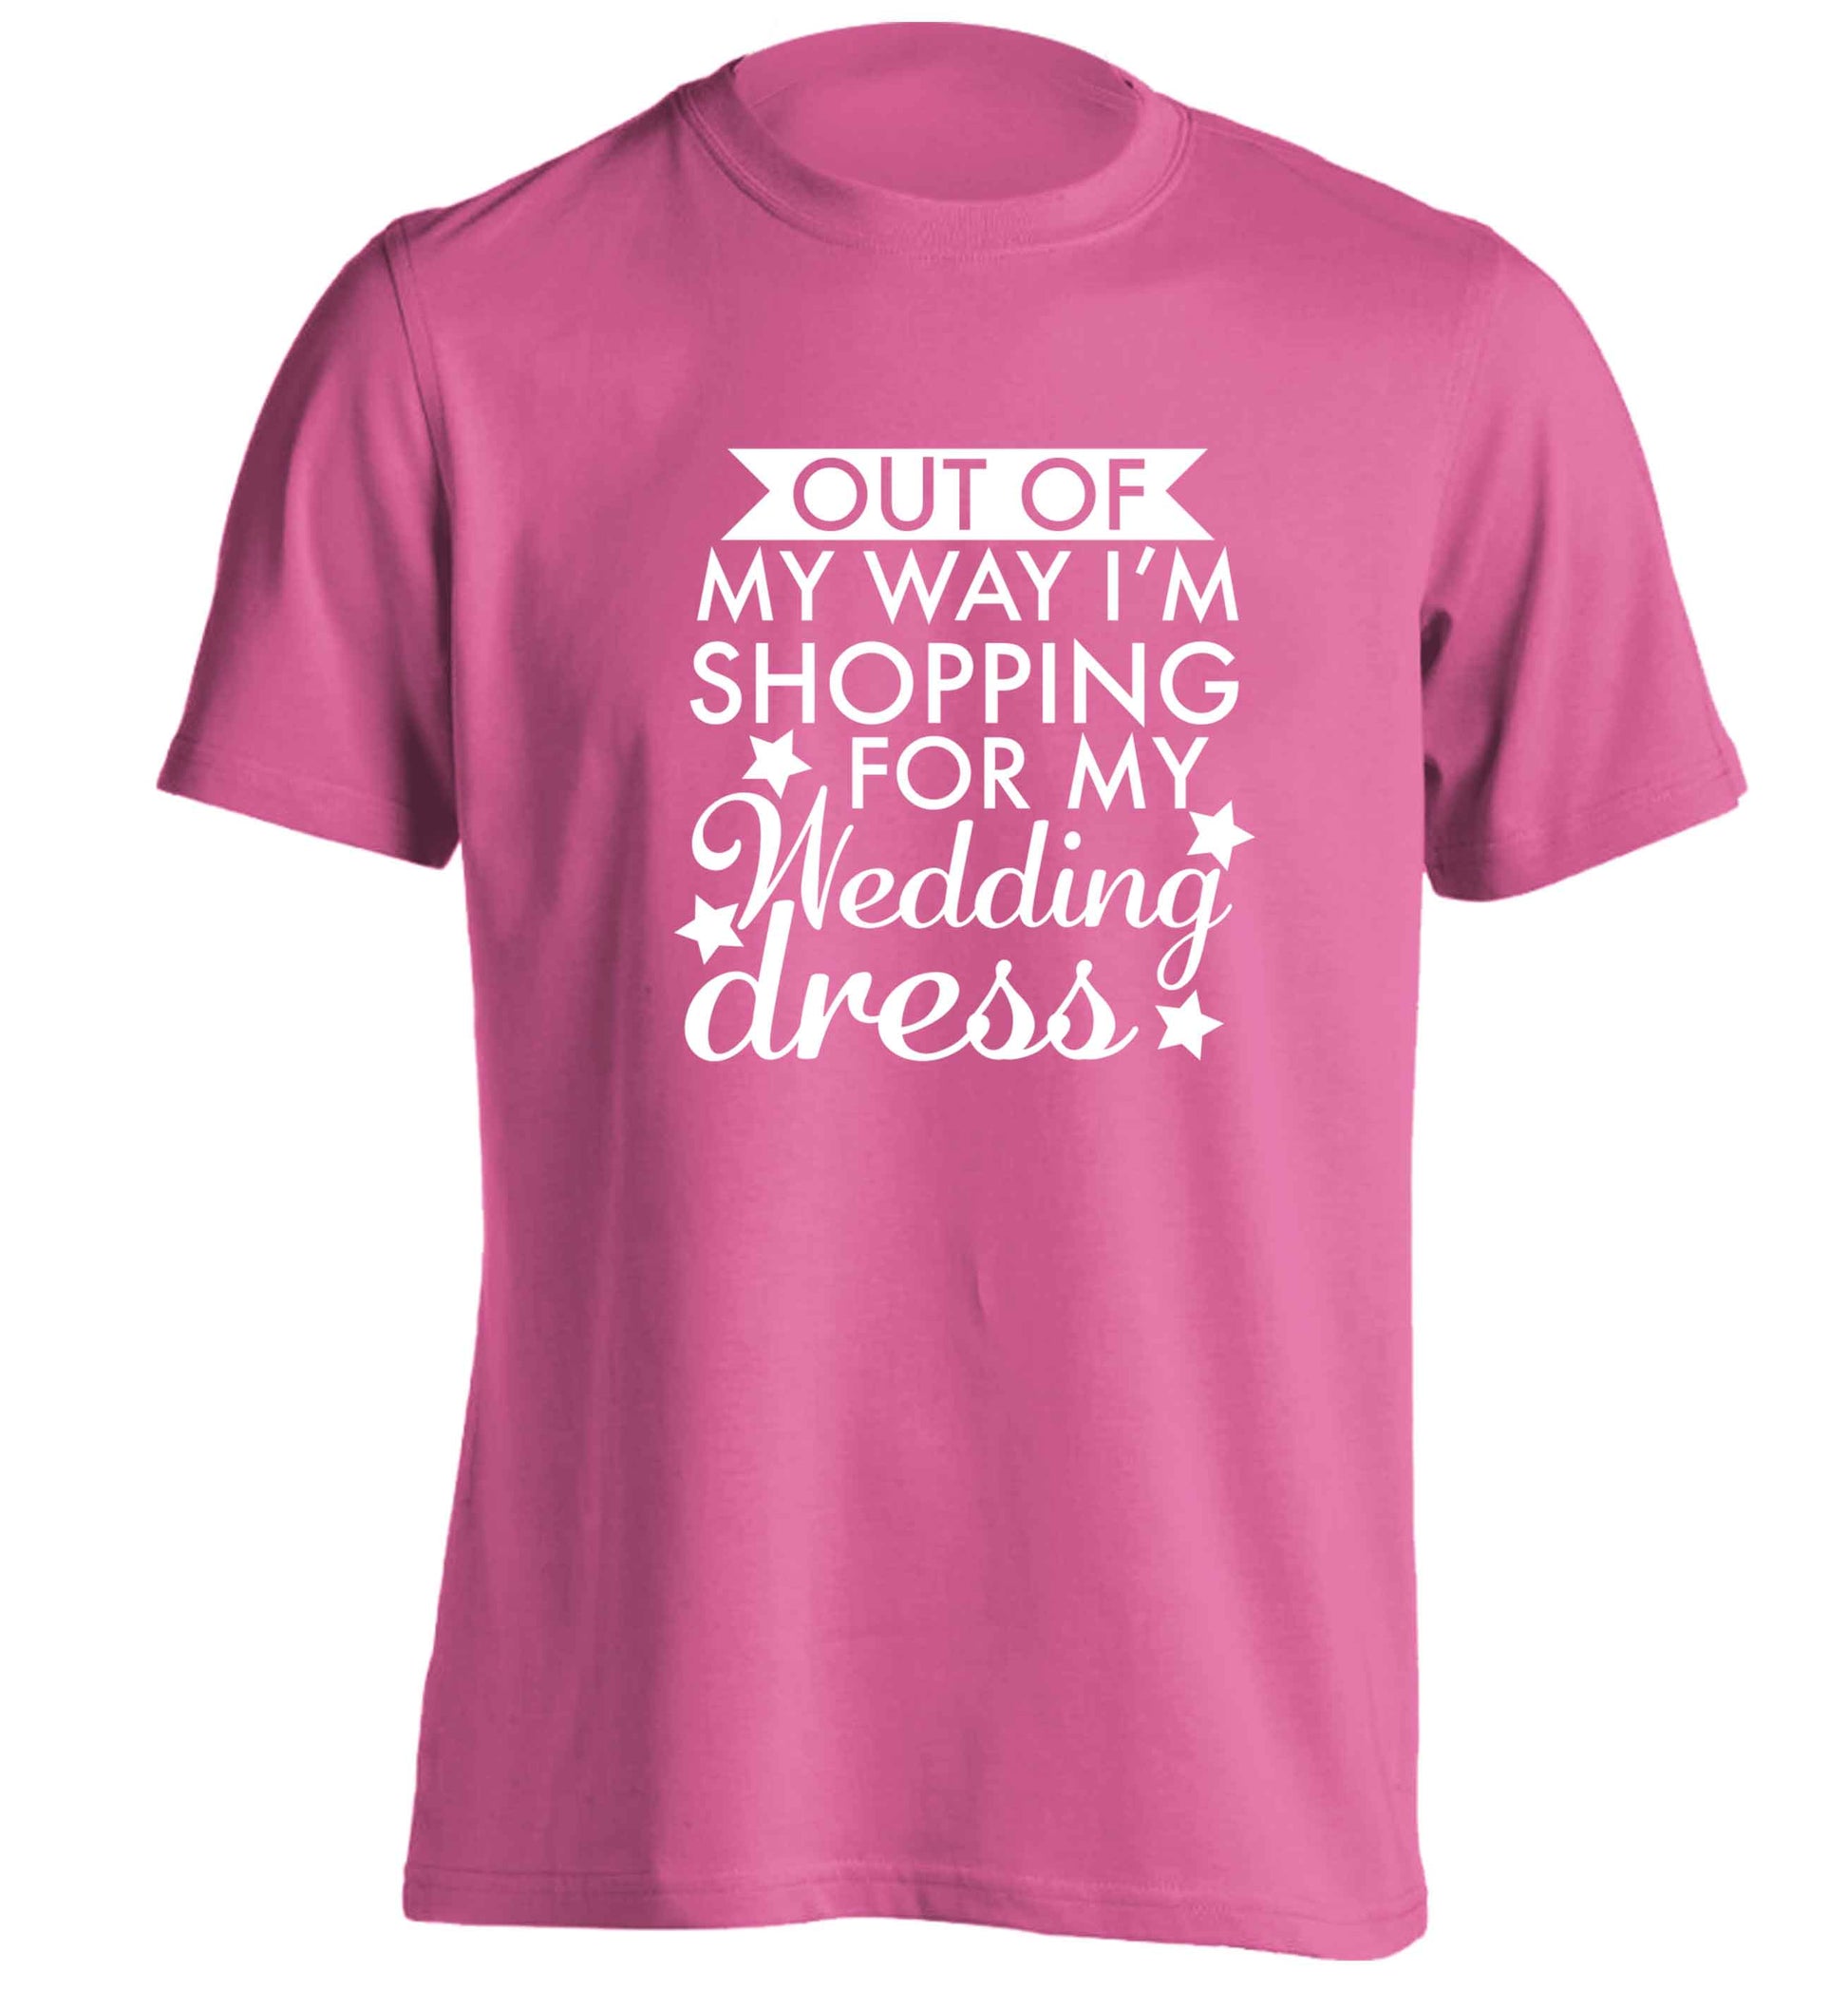 Out of my way I'm shopping for my wedding dress adults unisex pink Tshirt 2XL